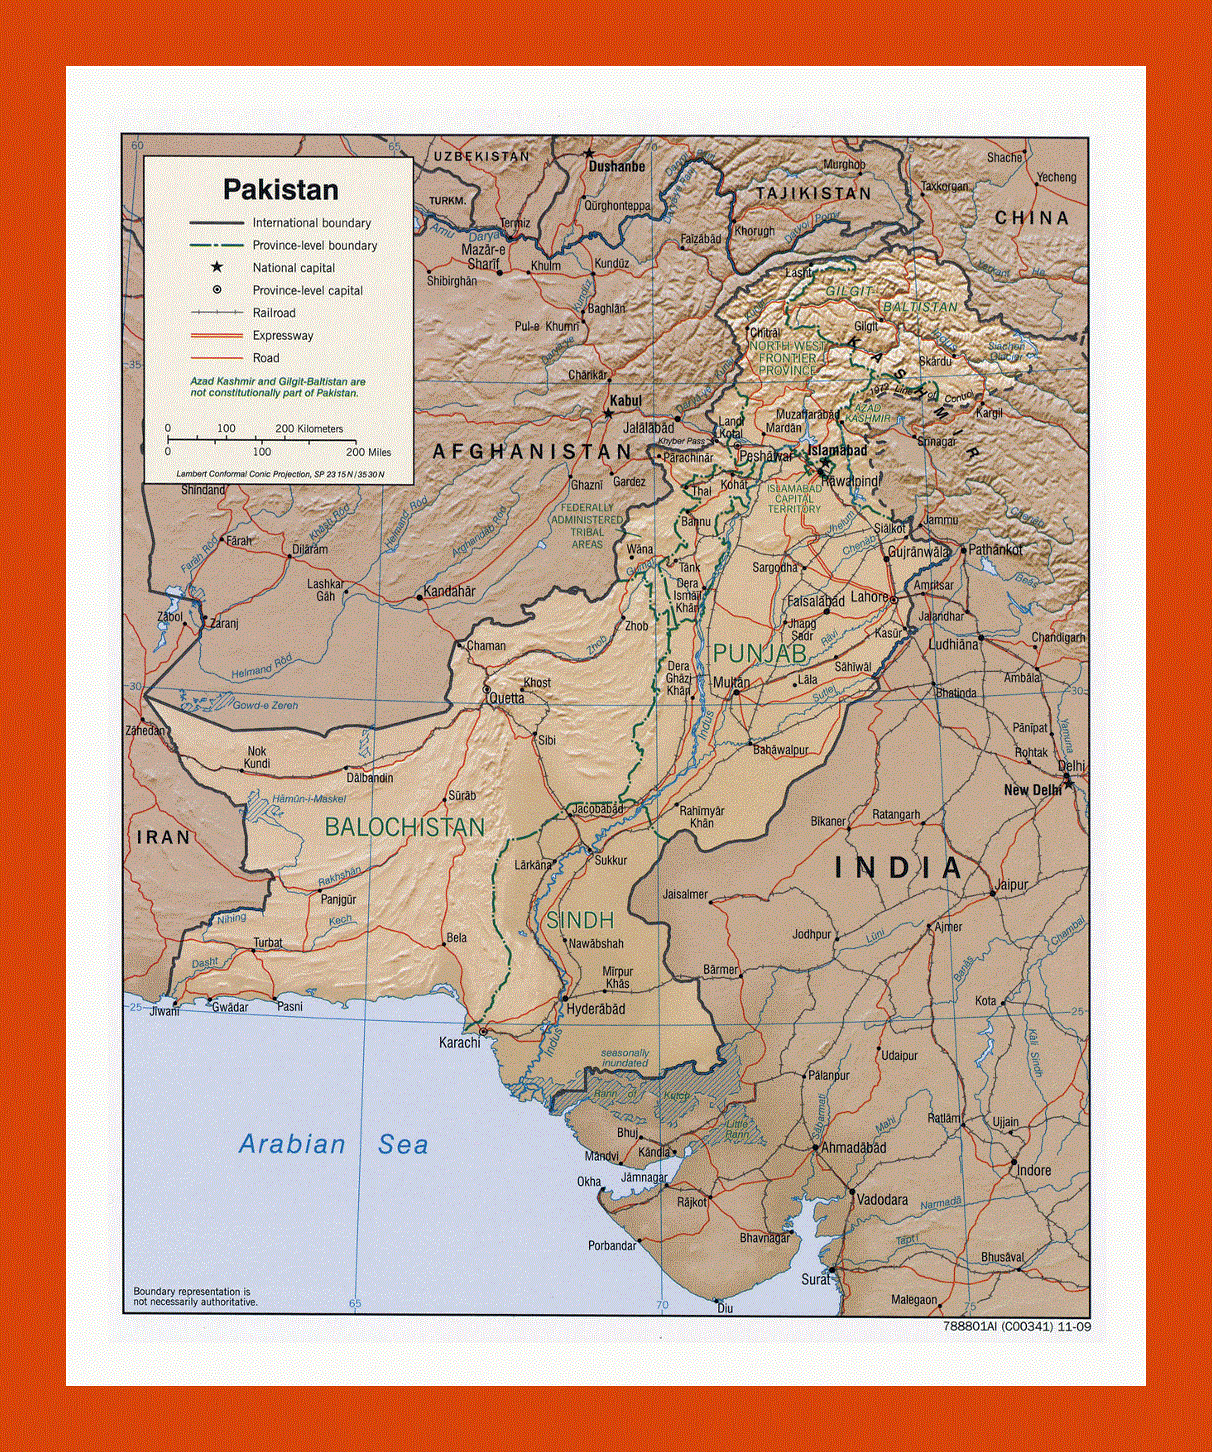 Political and administrative map of Pakistan - 2009